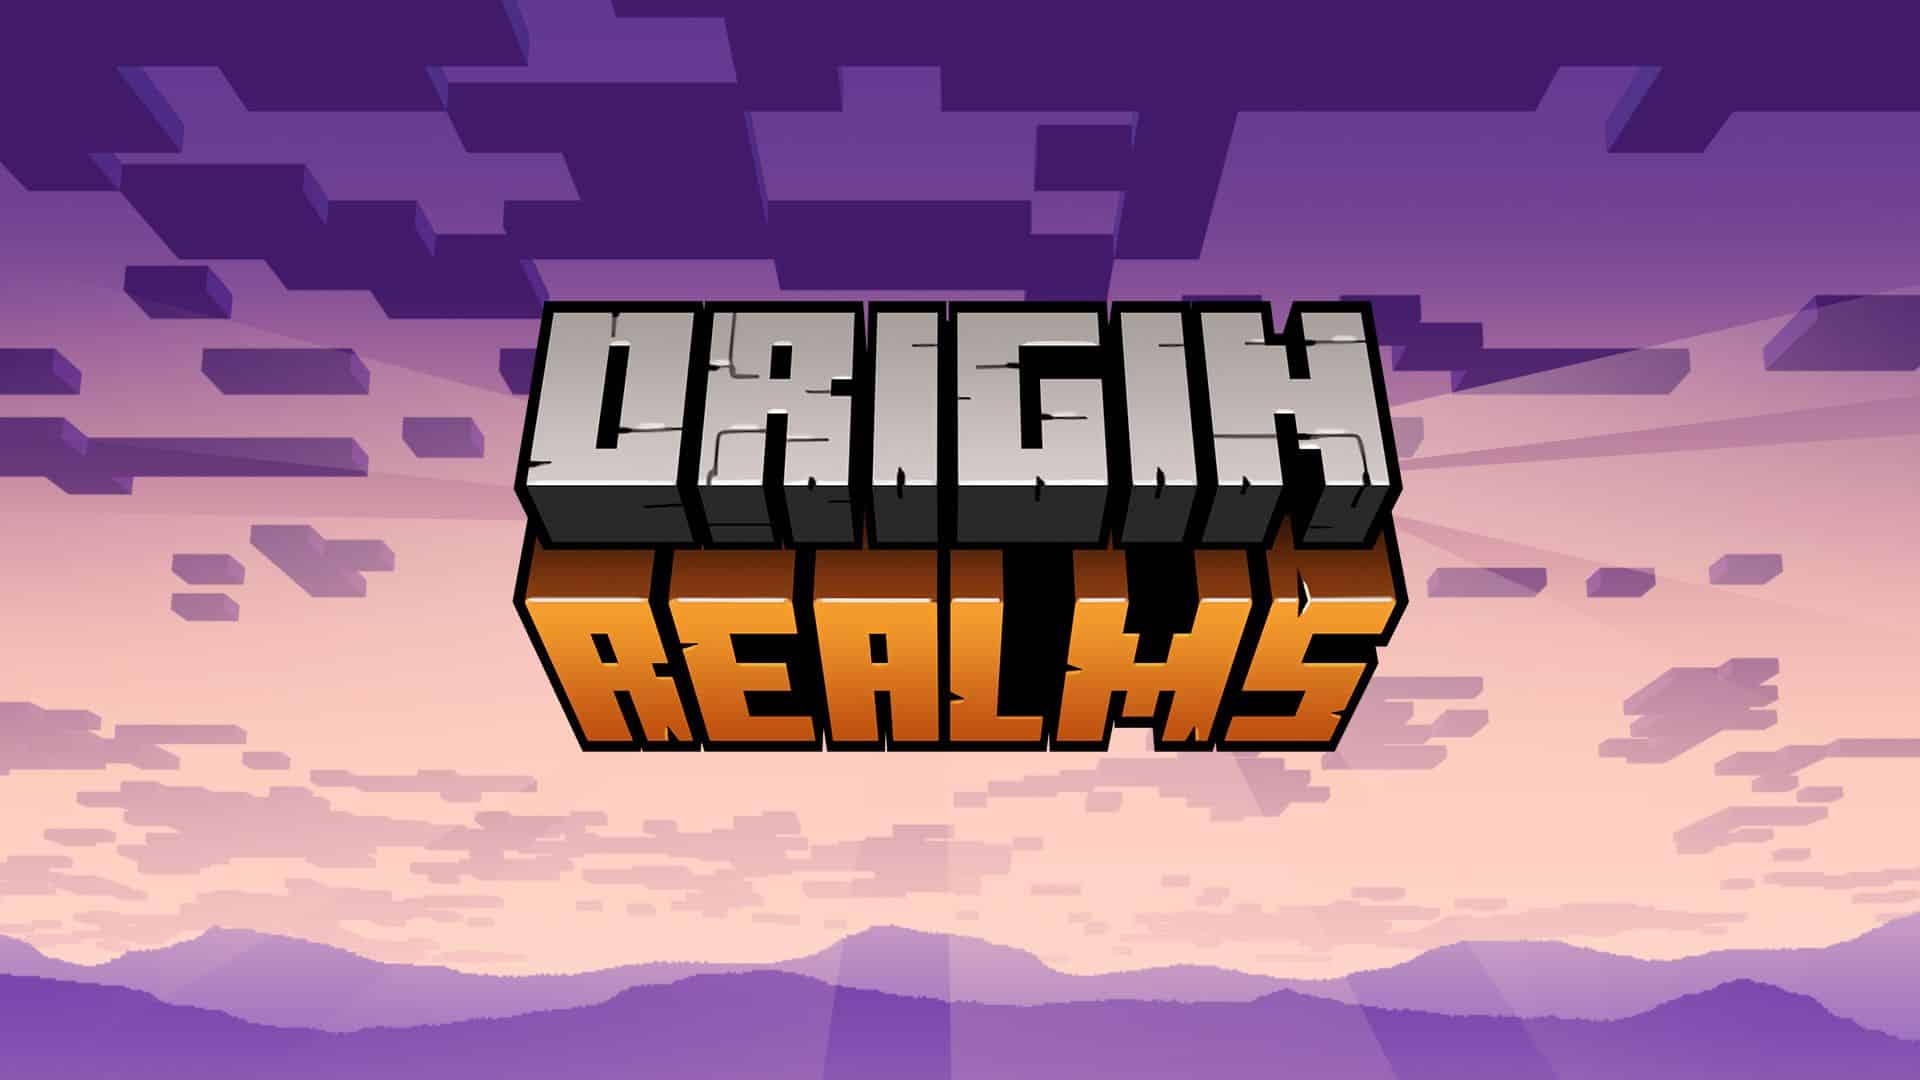 do you need minecraft realms to play with friends